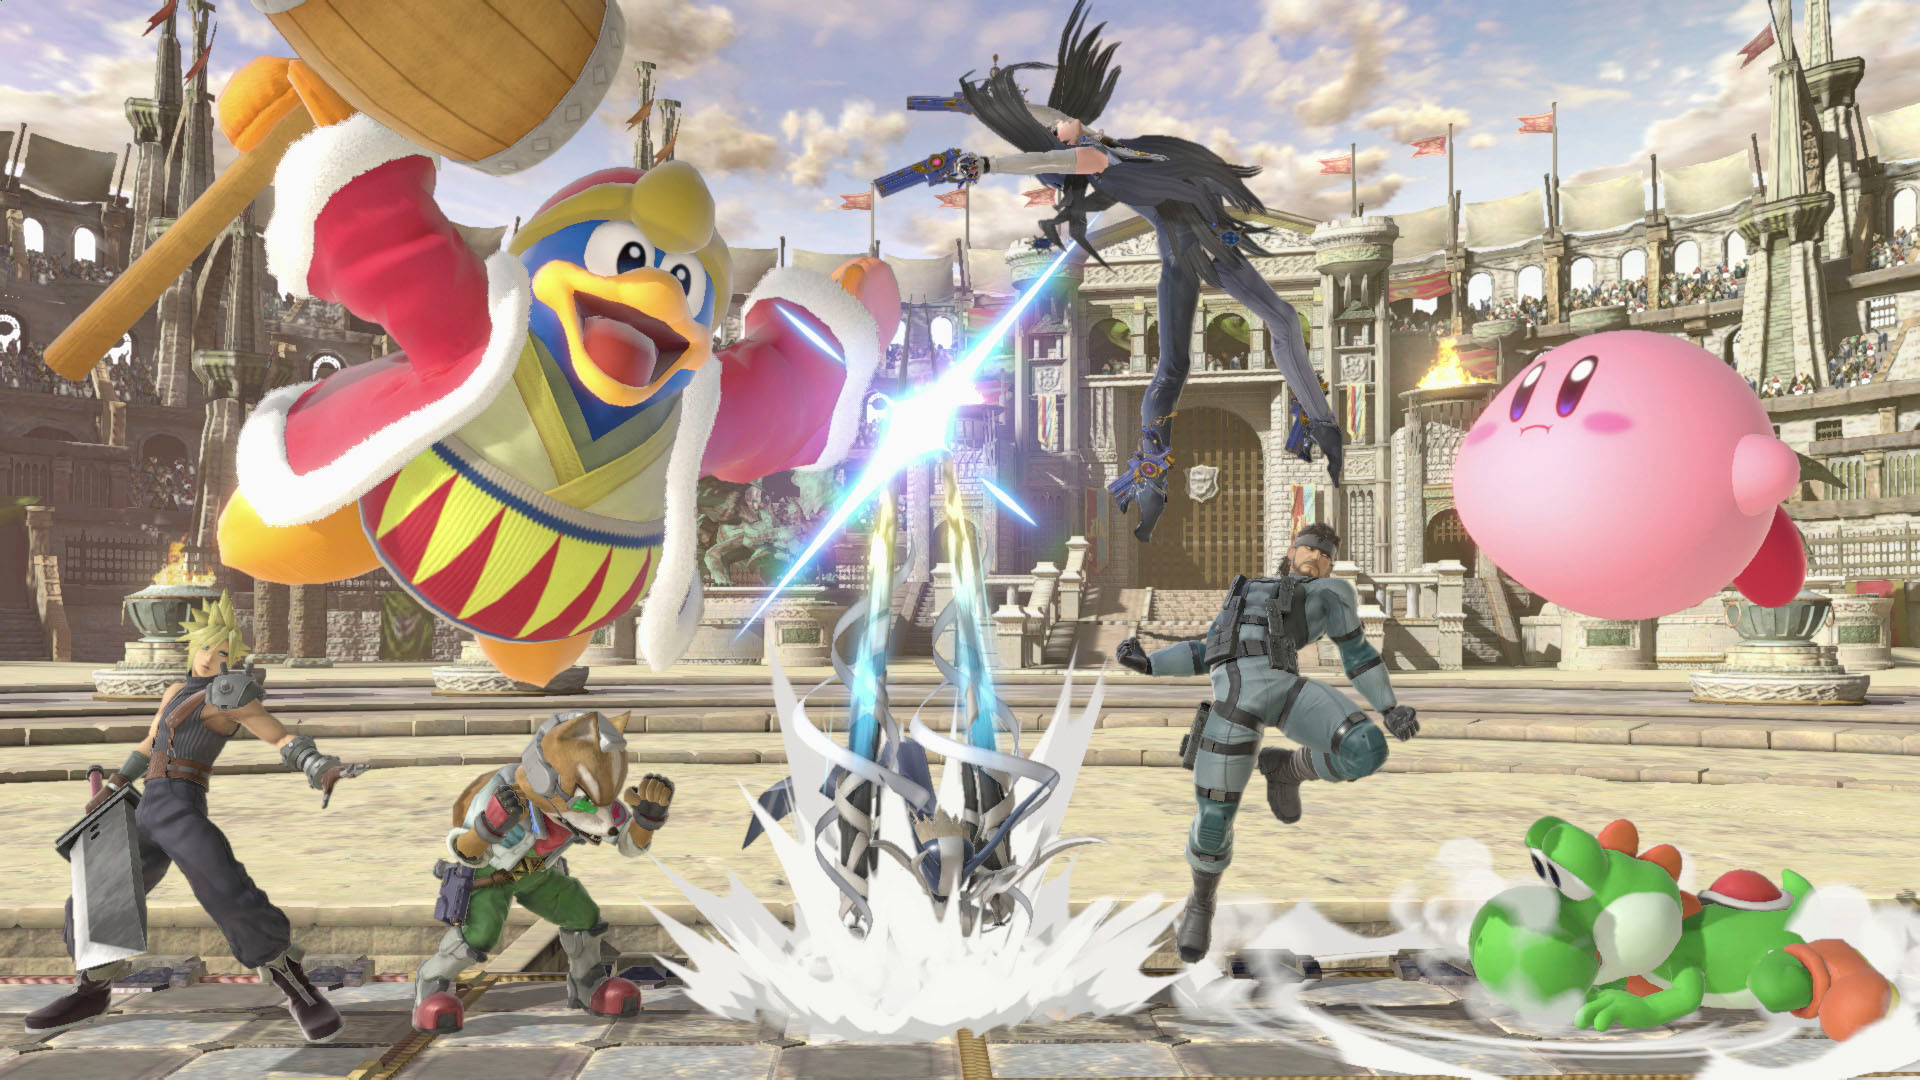 Lease-to-Own Super Smash Bros. Ultimate Bundle (Full Game Download + 3 Mo.  Nintendo Switch Online Membership Included) - $67.98 Value - Multi 